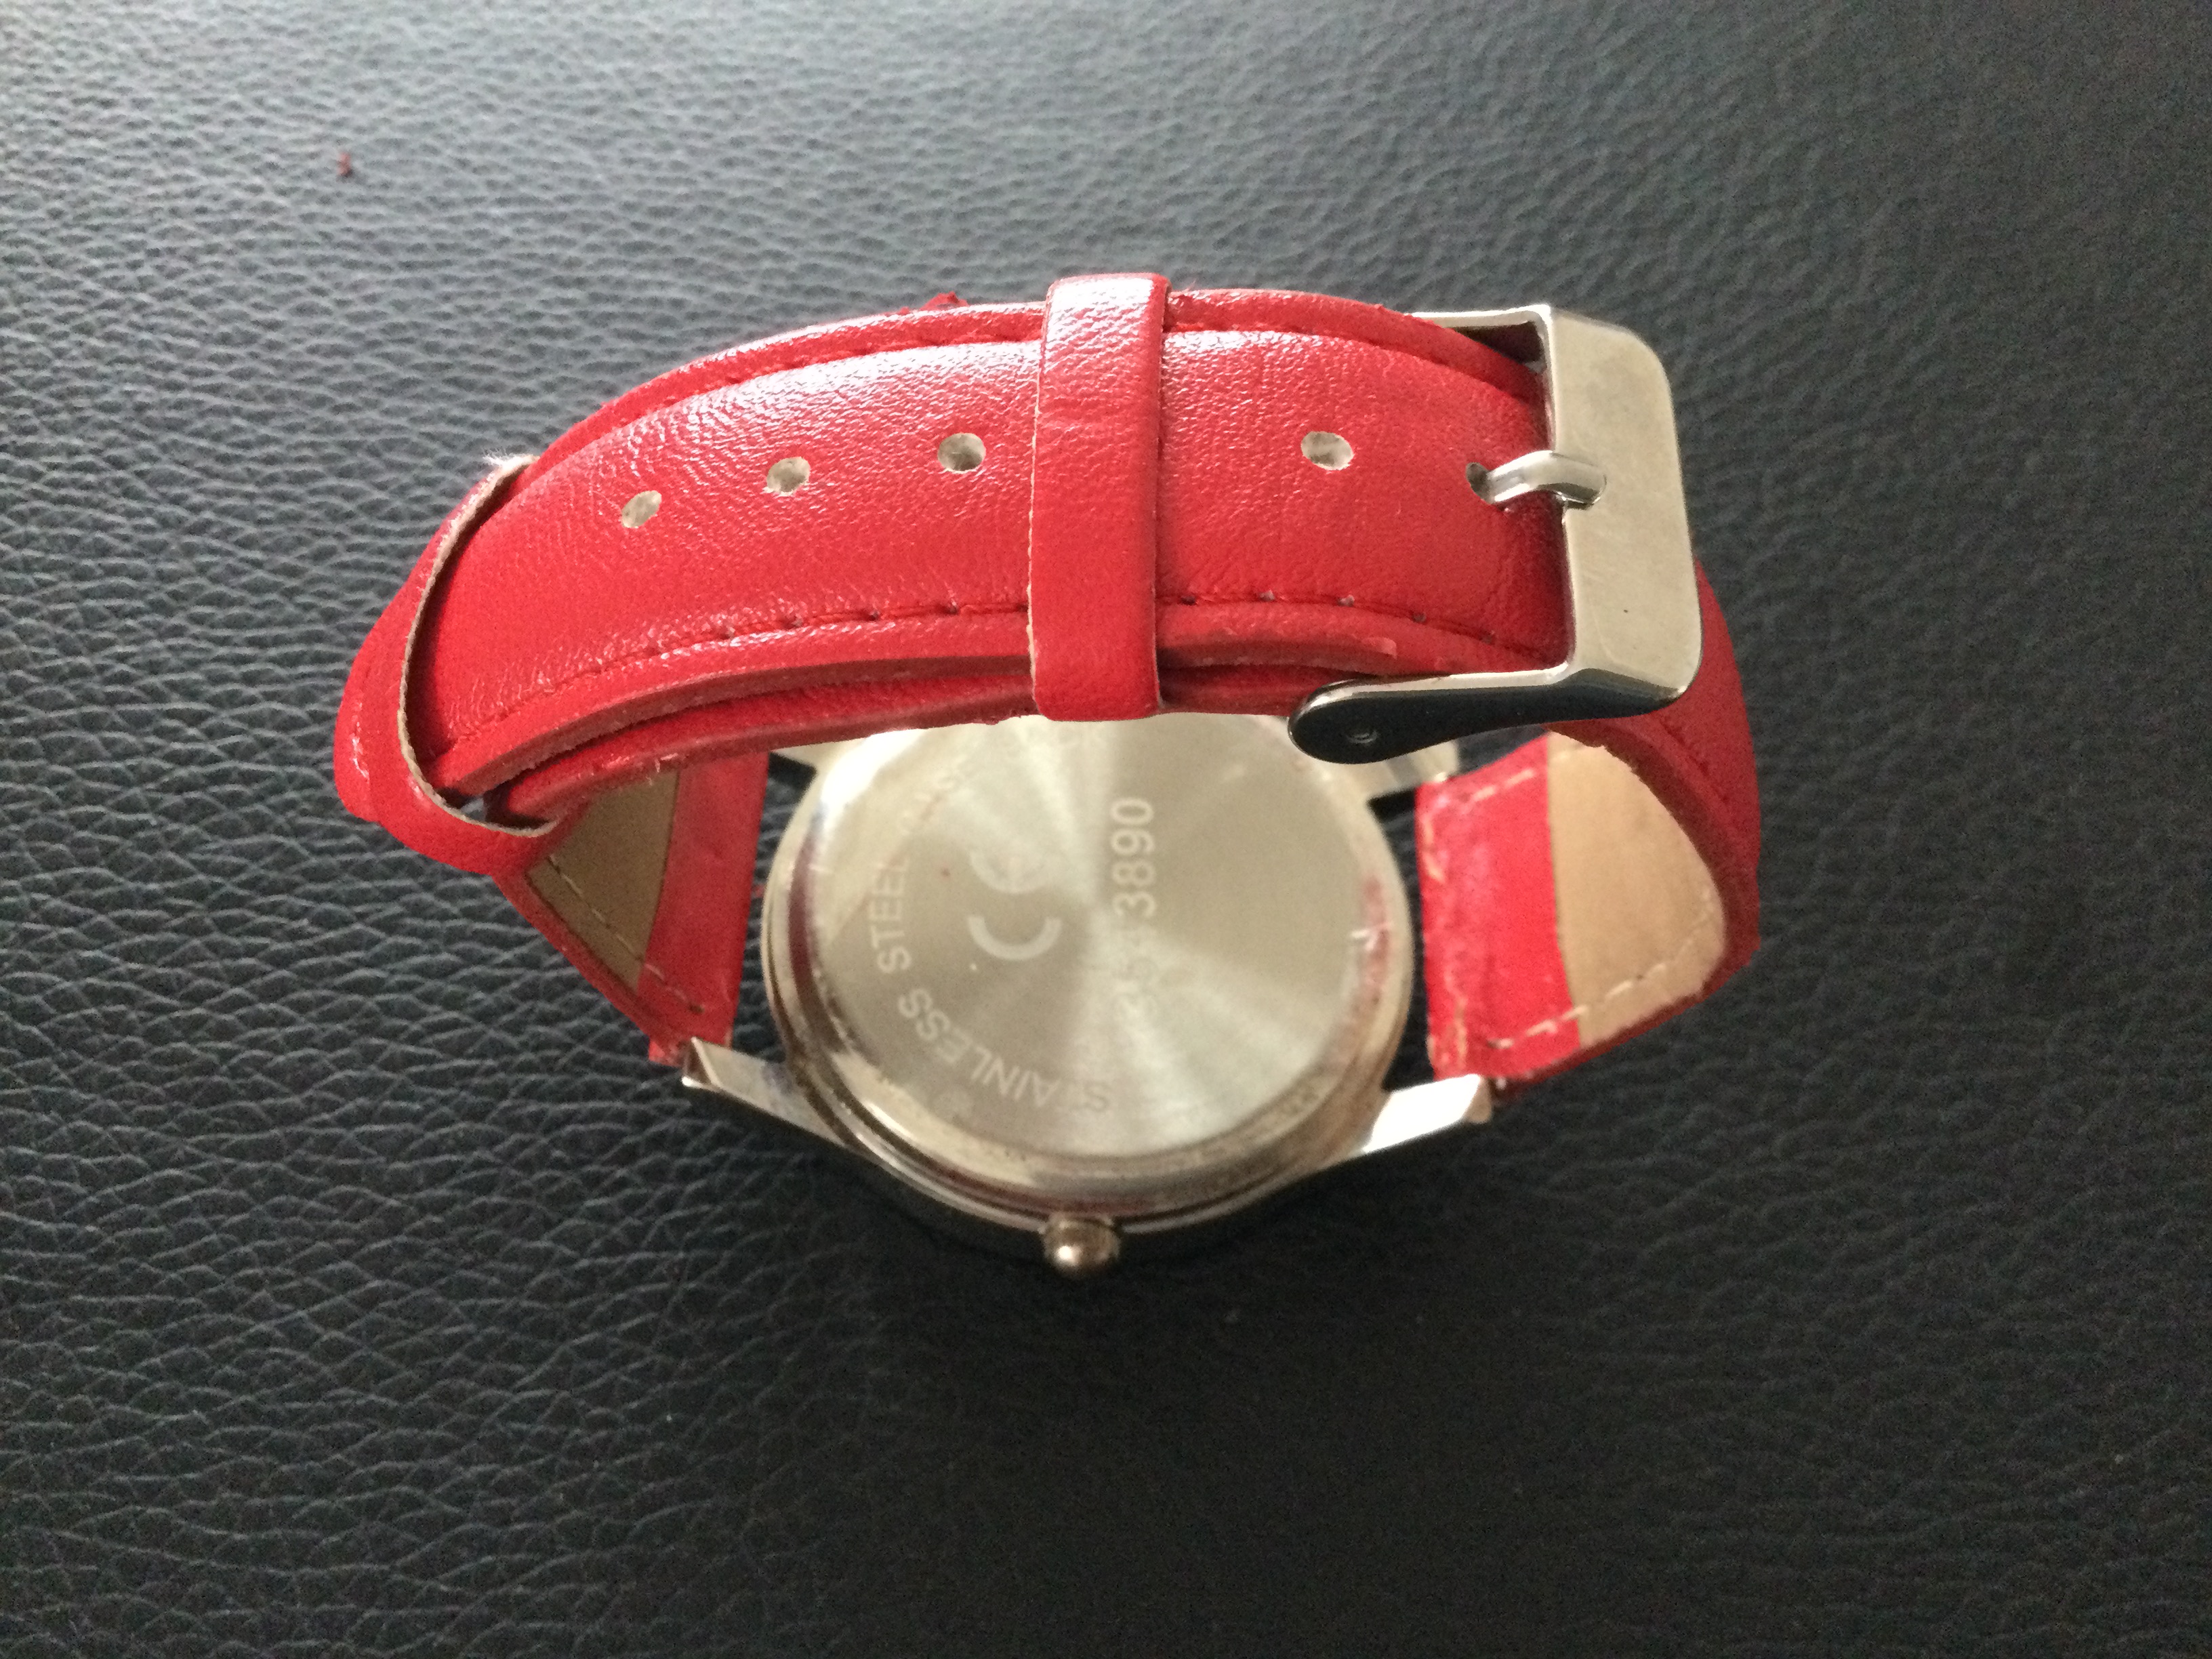 Decorative Ladies Quartz Wristwatch with Diamantes & Red Leather Strap (GS 136) A very - Image 3 of 5